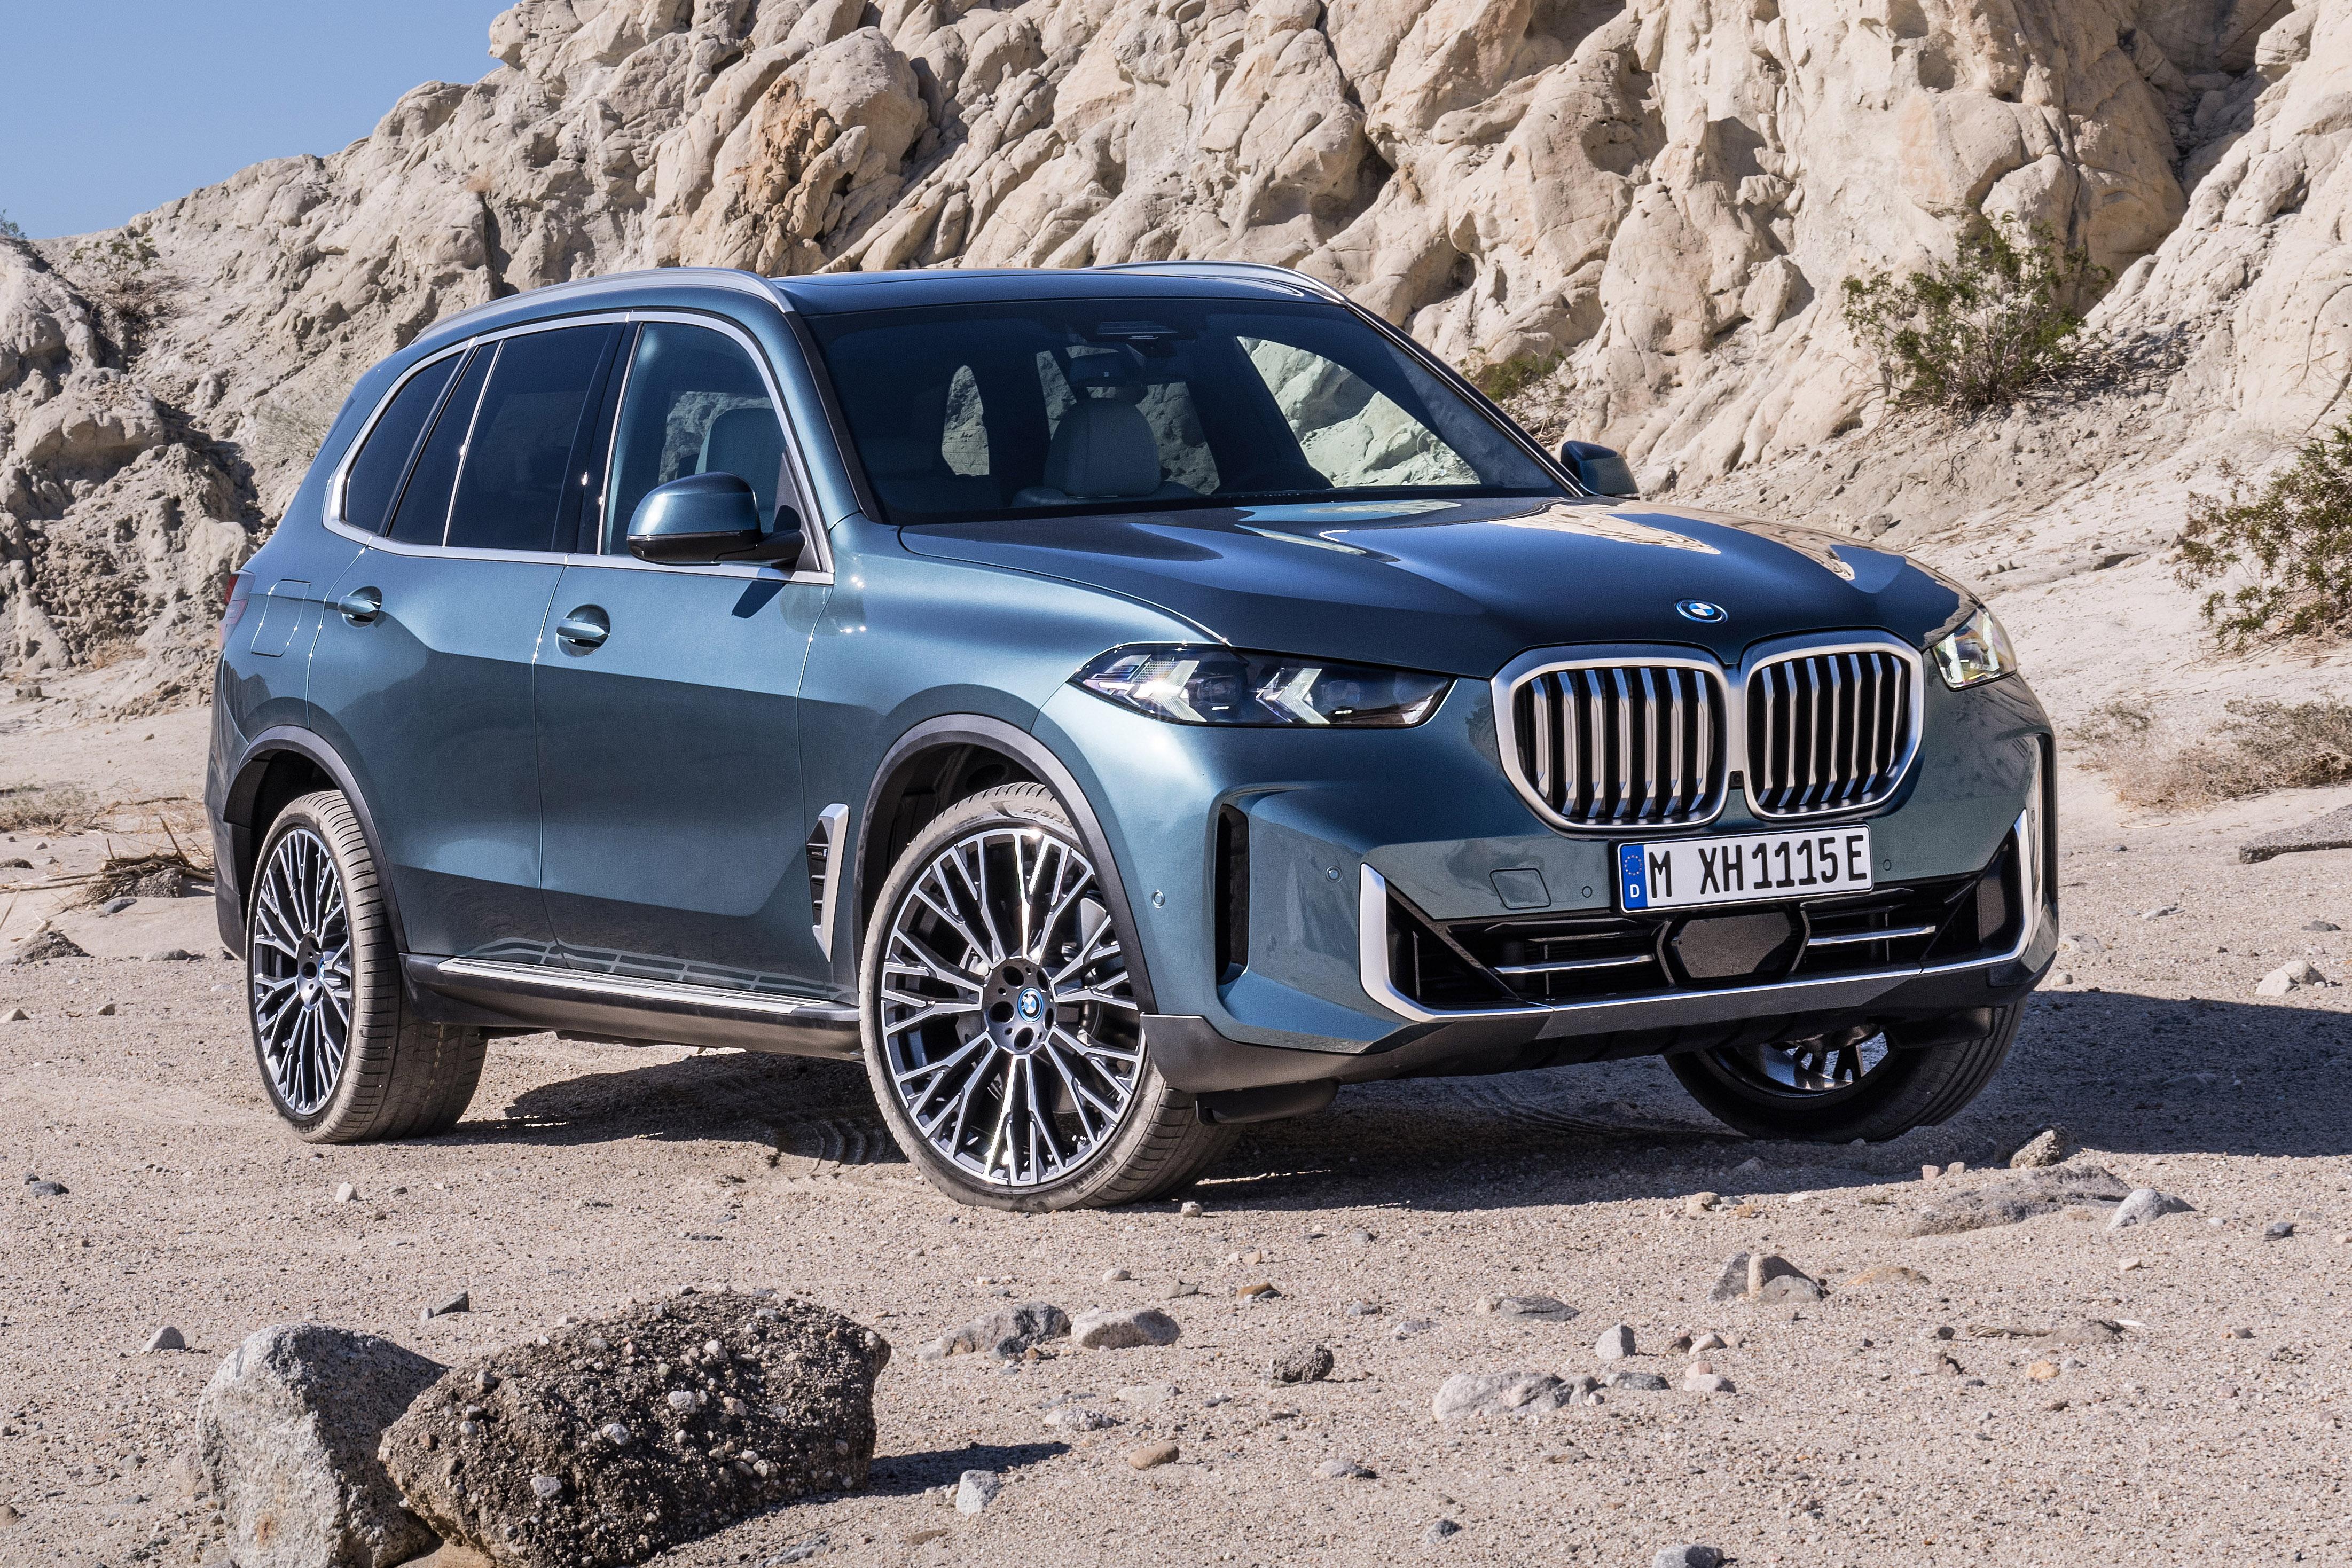 2015 BMW X5 Research, Photos, Specs and Expertise